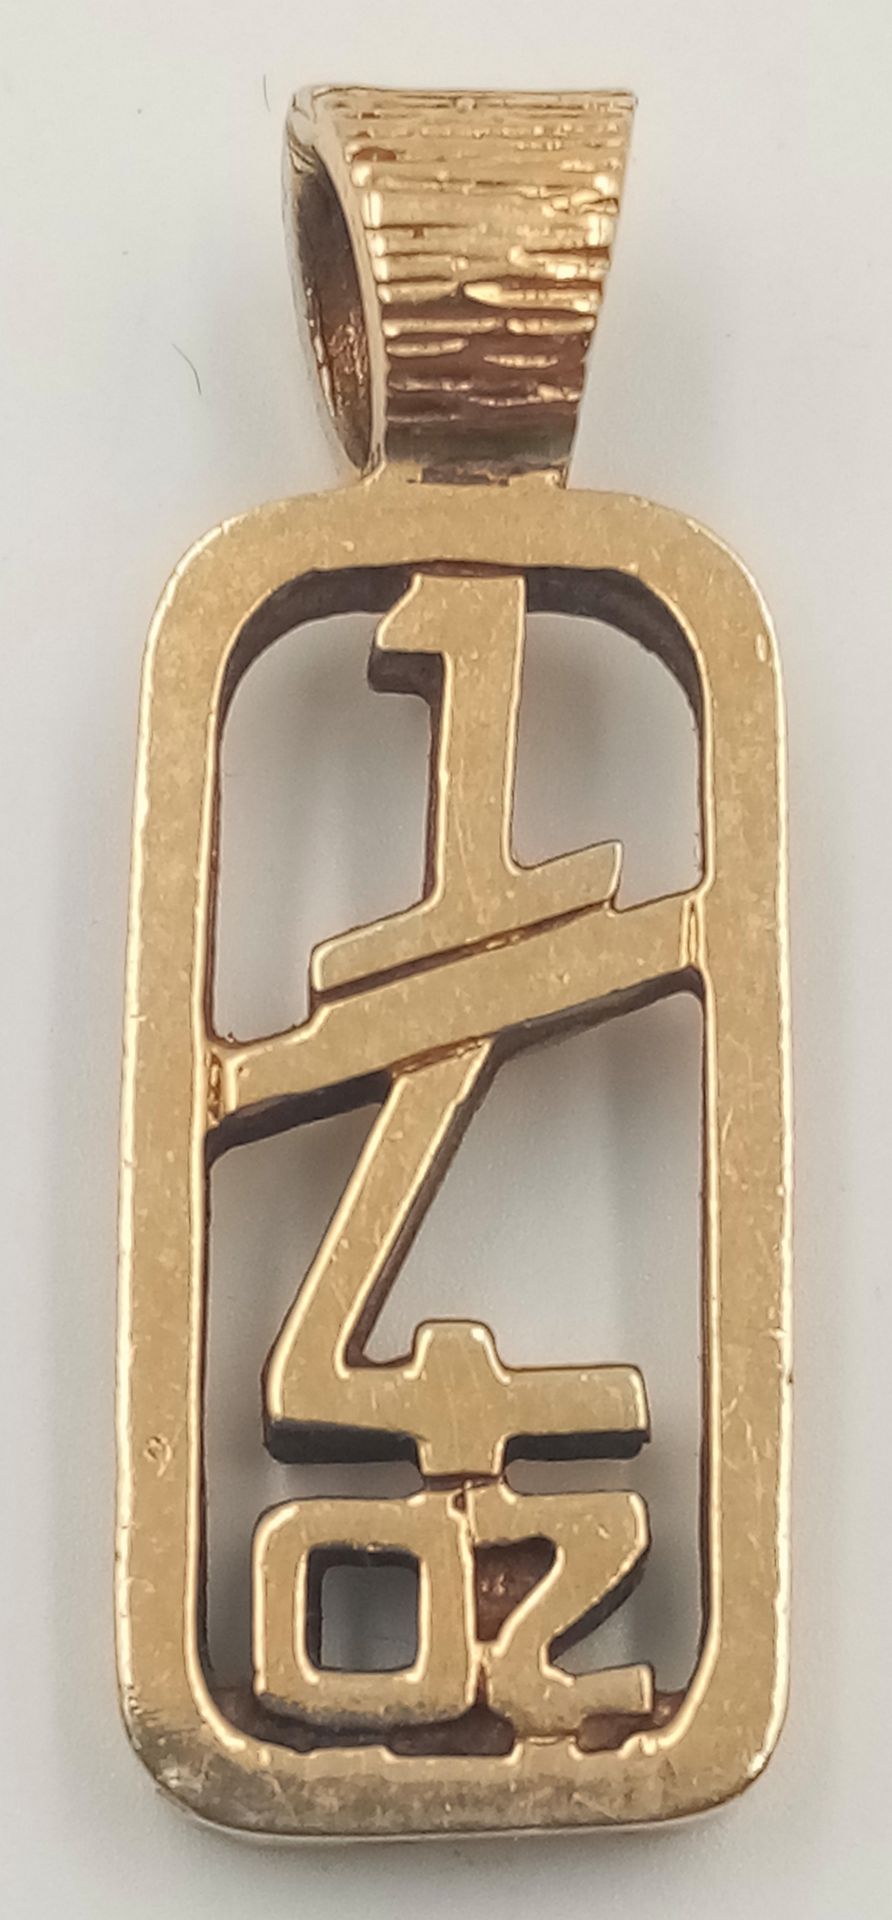 A 9K yellow gold pendant in the shape of "1/4 OZ", length (with bail): 35mm, total weight: 8.6g.